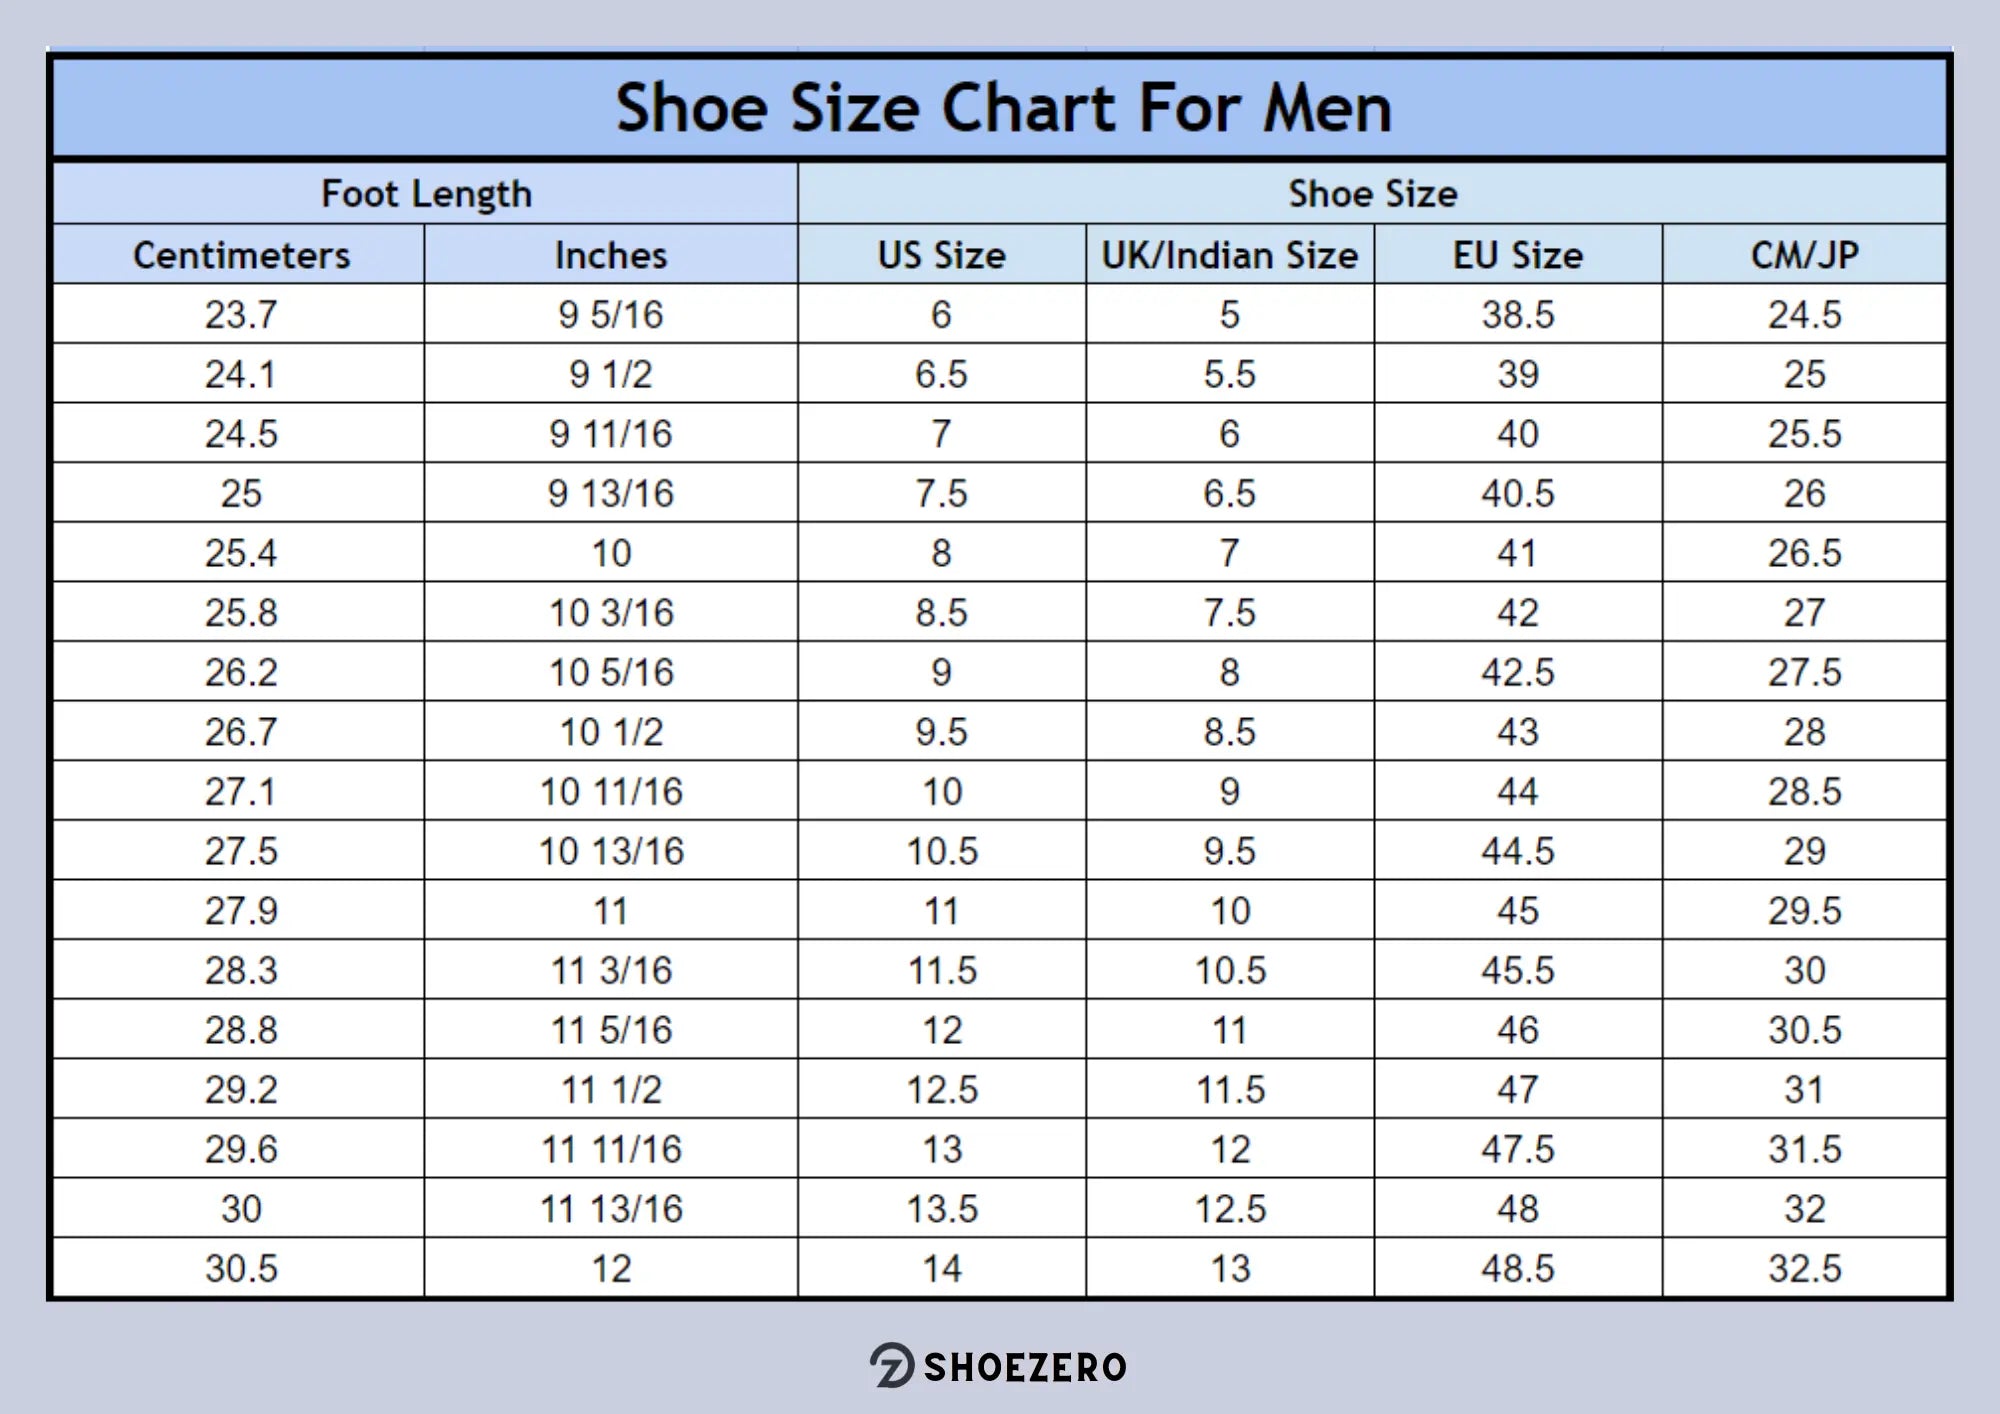 Understanding Wide Shoe Sizes: What Are They? 